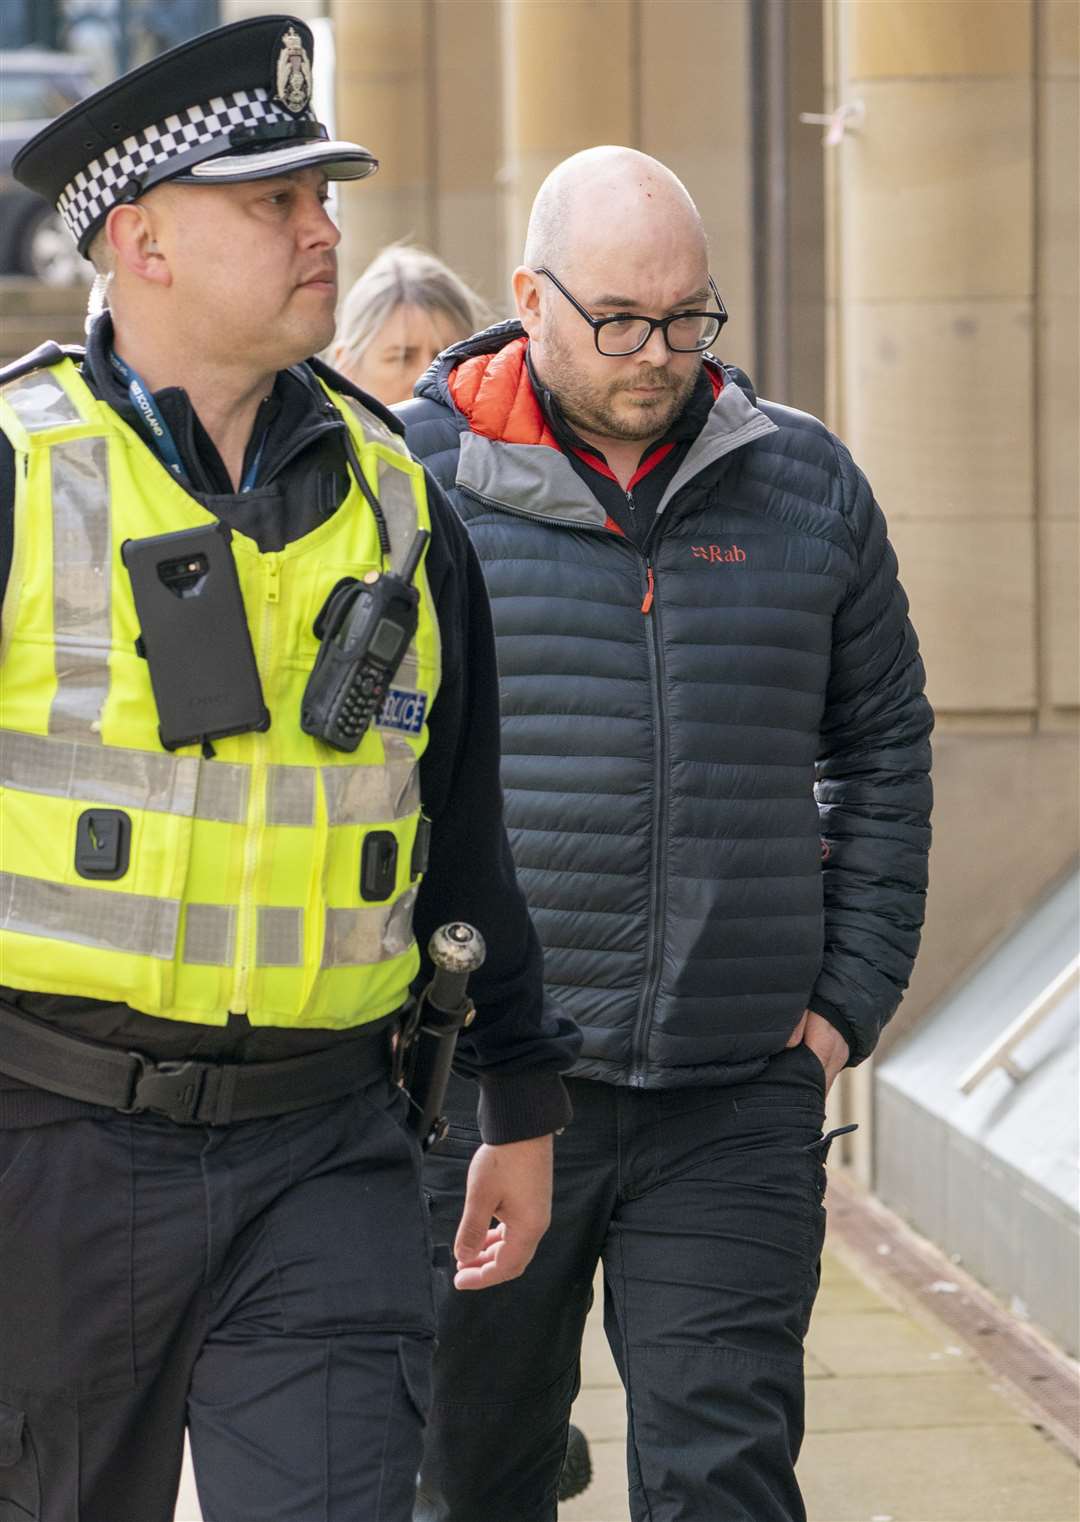 Pc Alan Smith (right) arrives at Capital House in Edinburgh for the public inquiry into Sheku Bayoh’s death (Jane Barlow/PA)